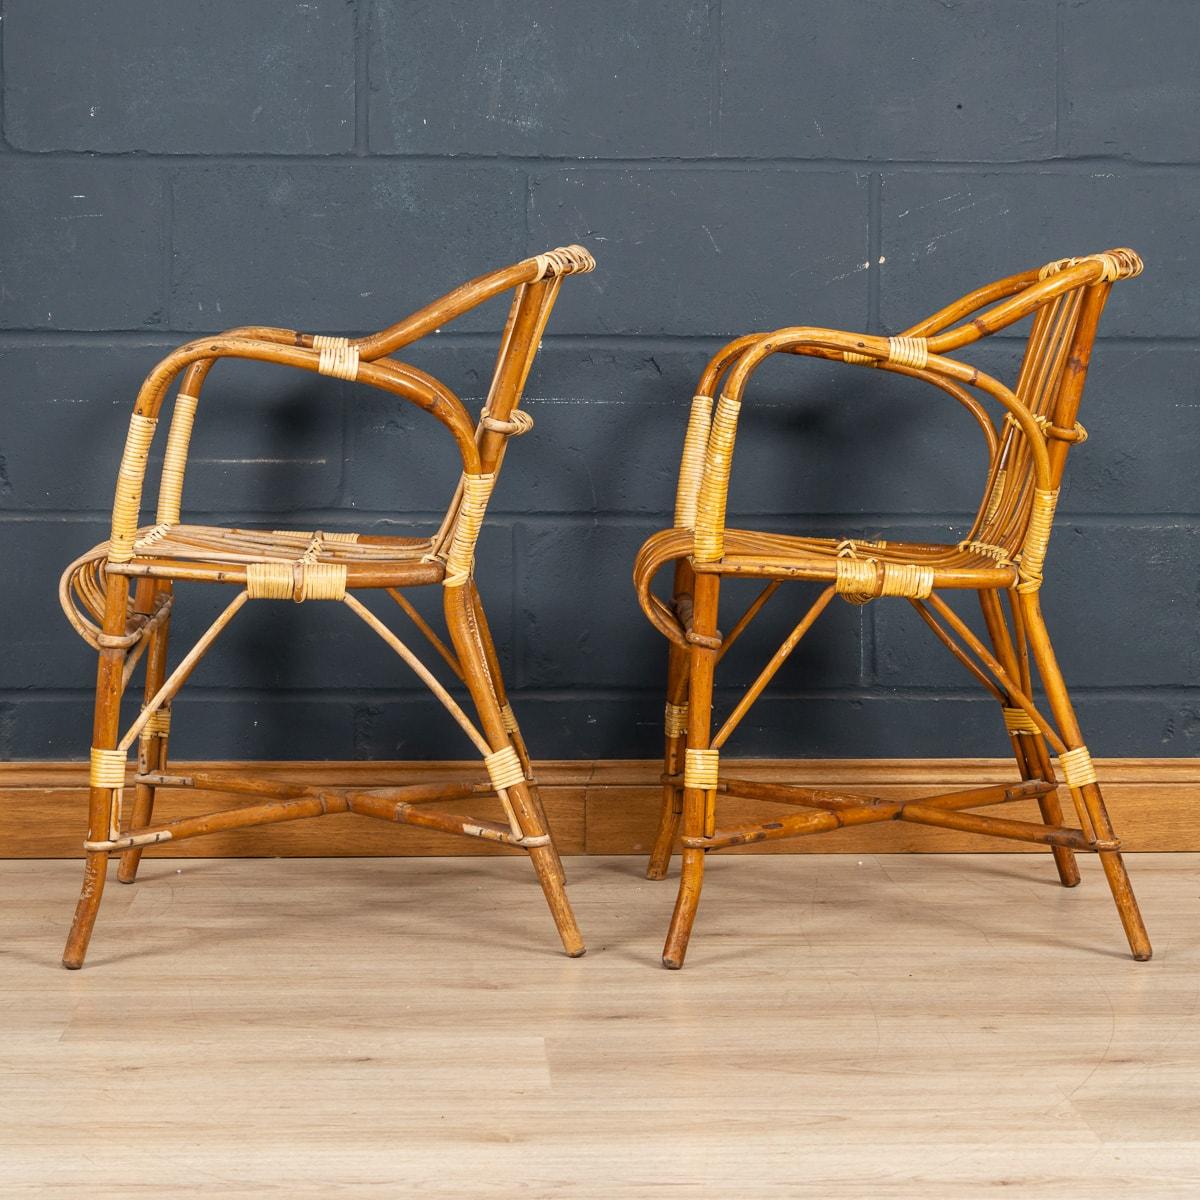 20th Century French Wicker Chairs By Drucker 1